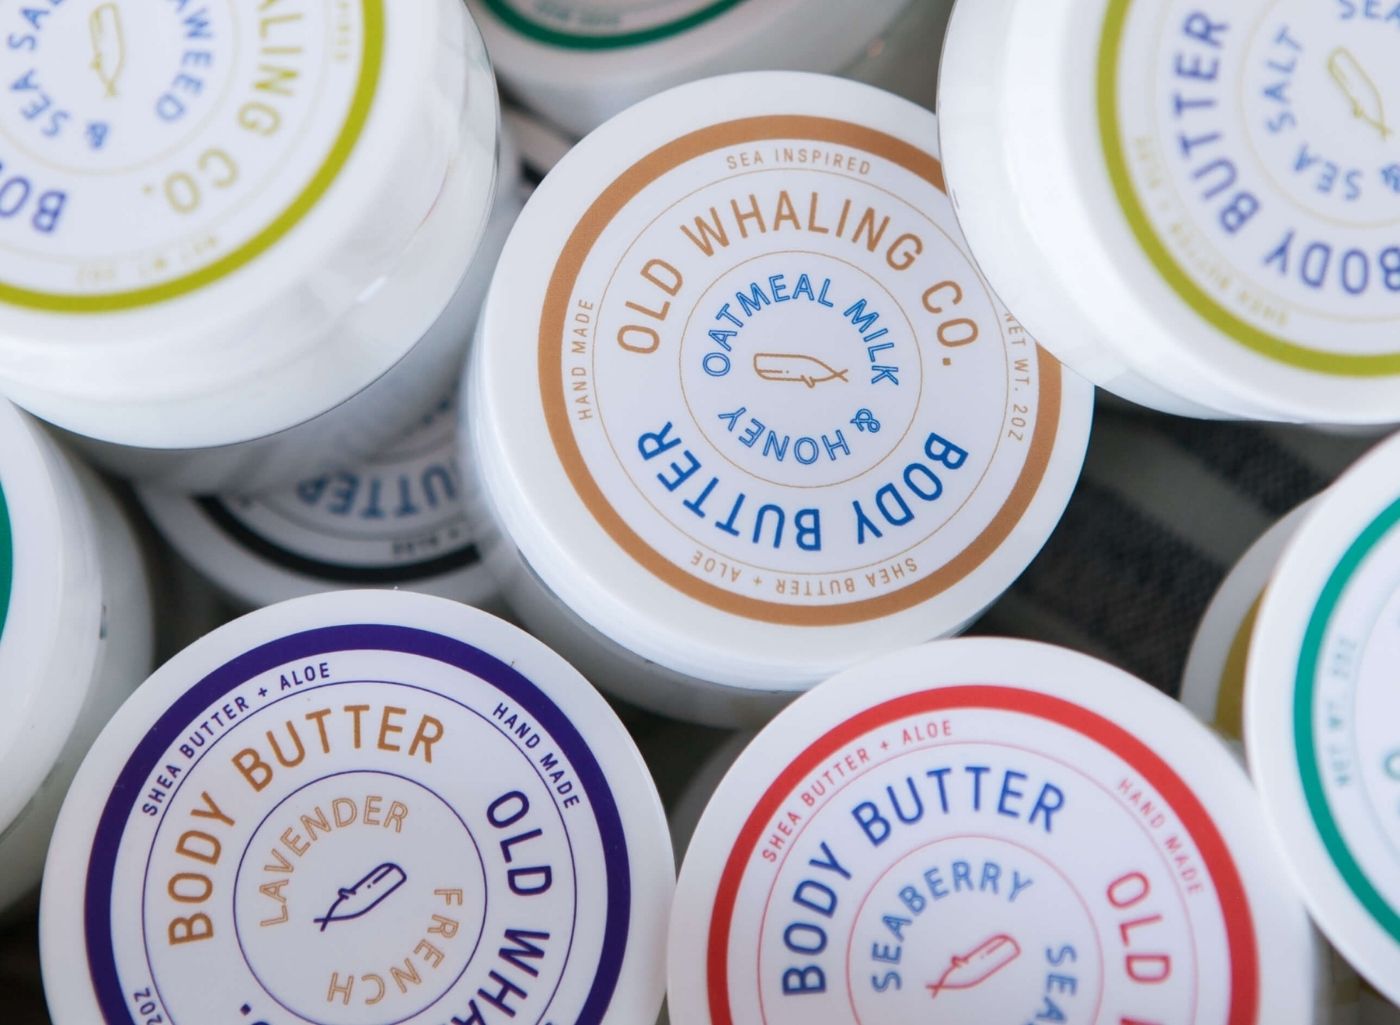 Cans of body butter from old whaling co.